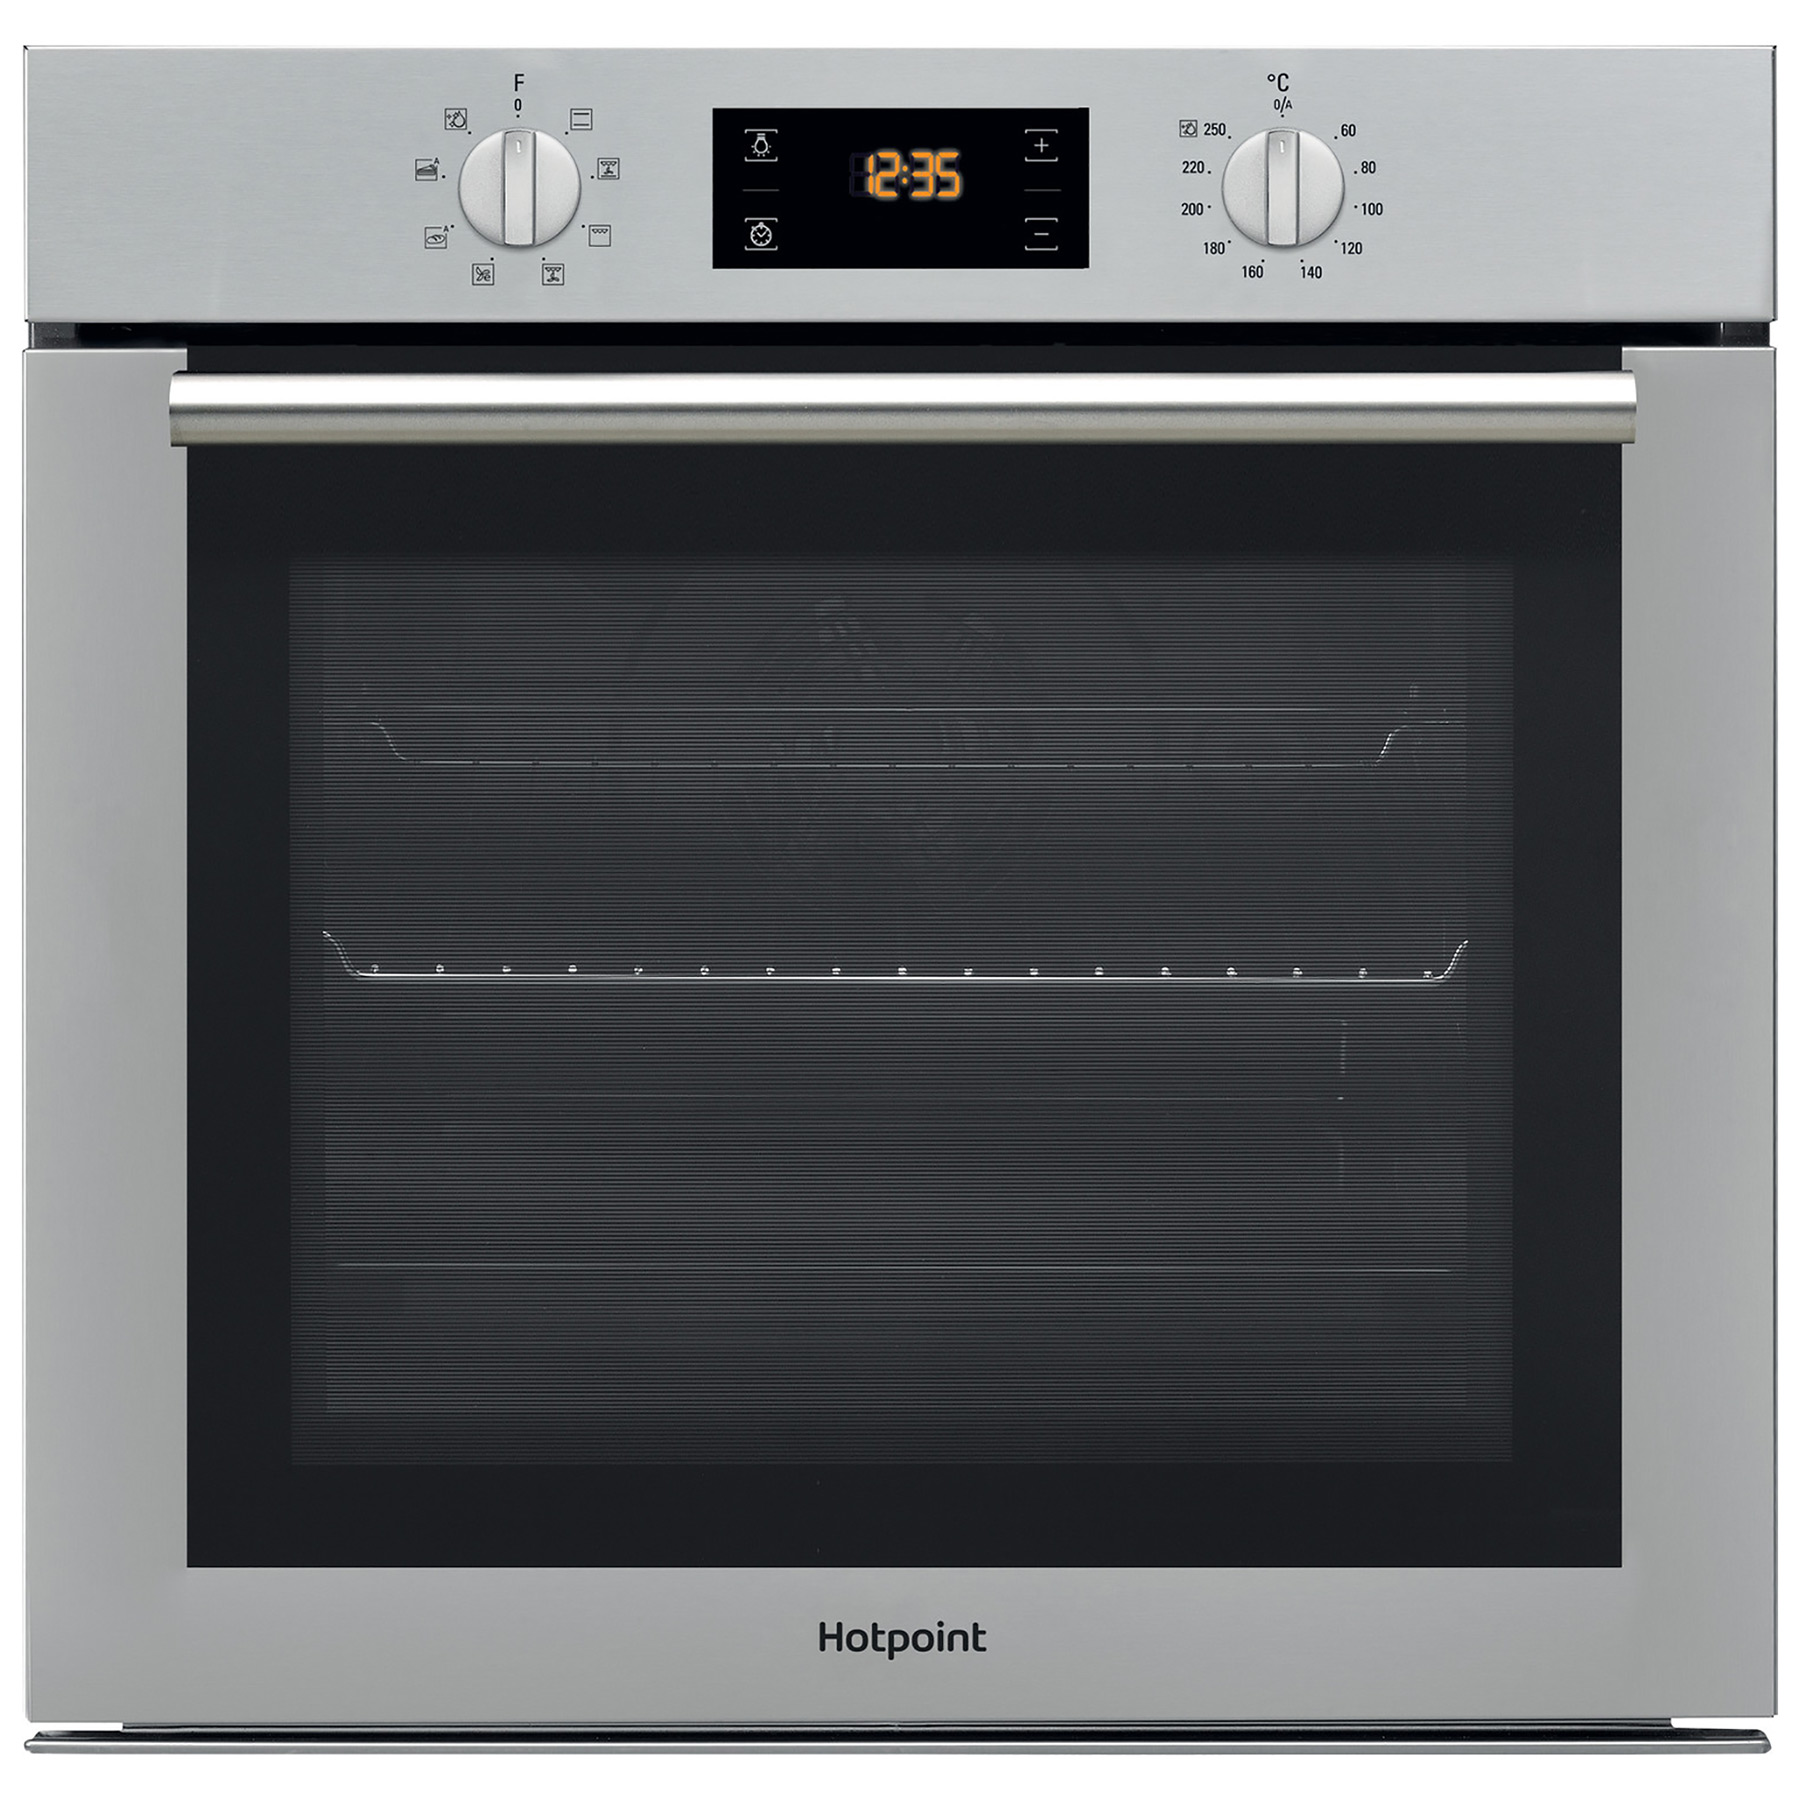 Image of Hotpoint SA4544HIX Built In Electric Single Oven in St Steel 71L